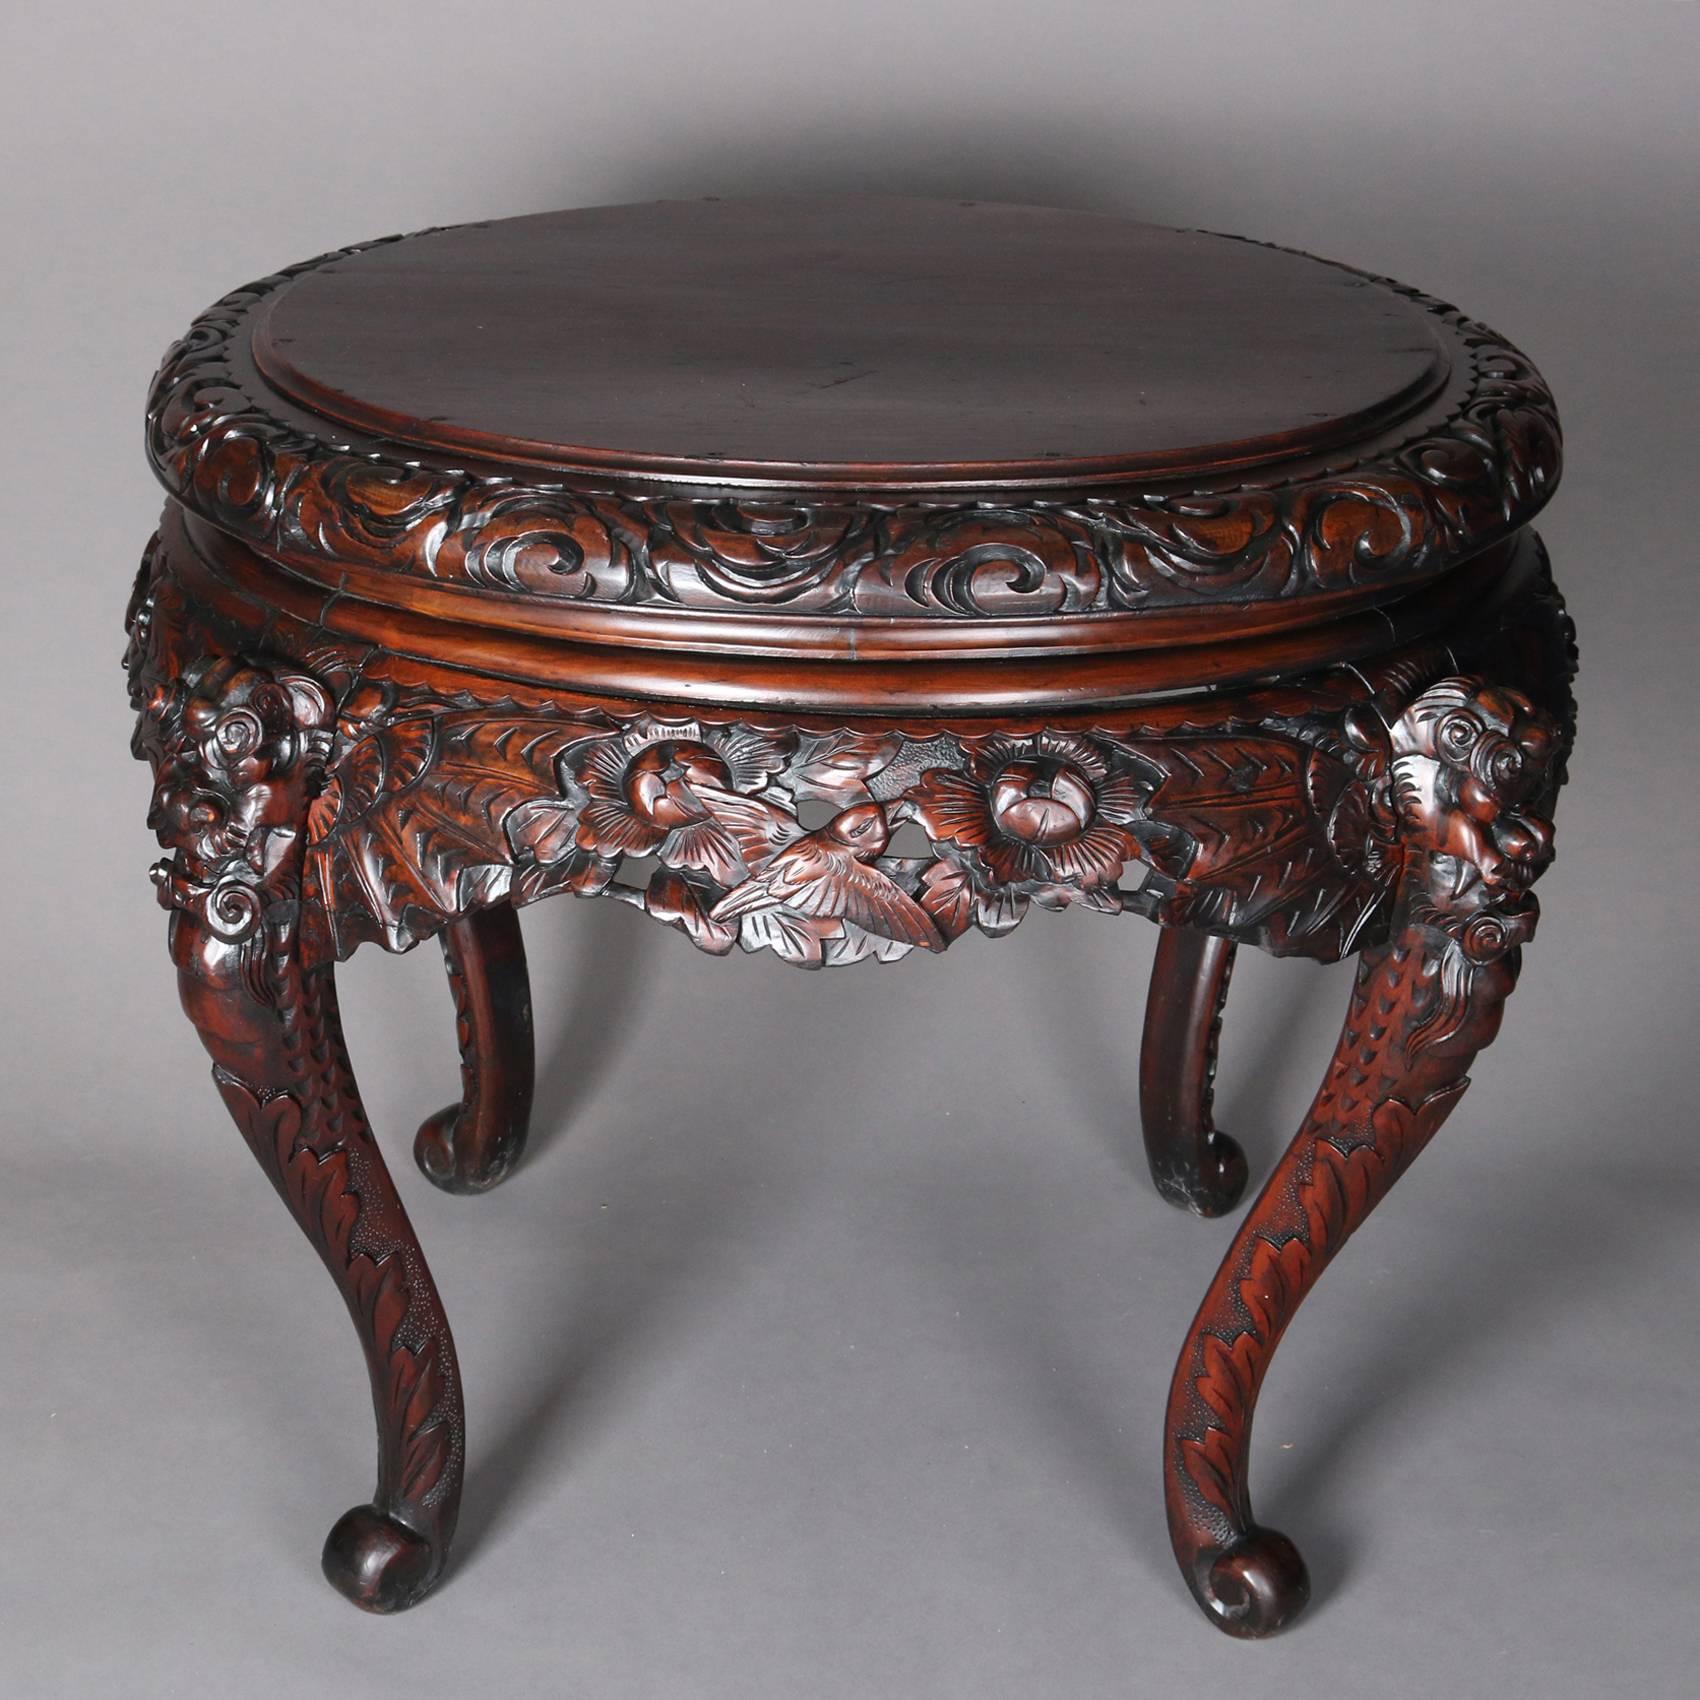 Hand-Carved Antique Japanese Carved Hardwood Figural Centre Table, 19th Century